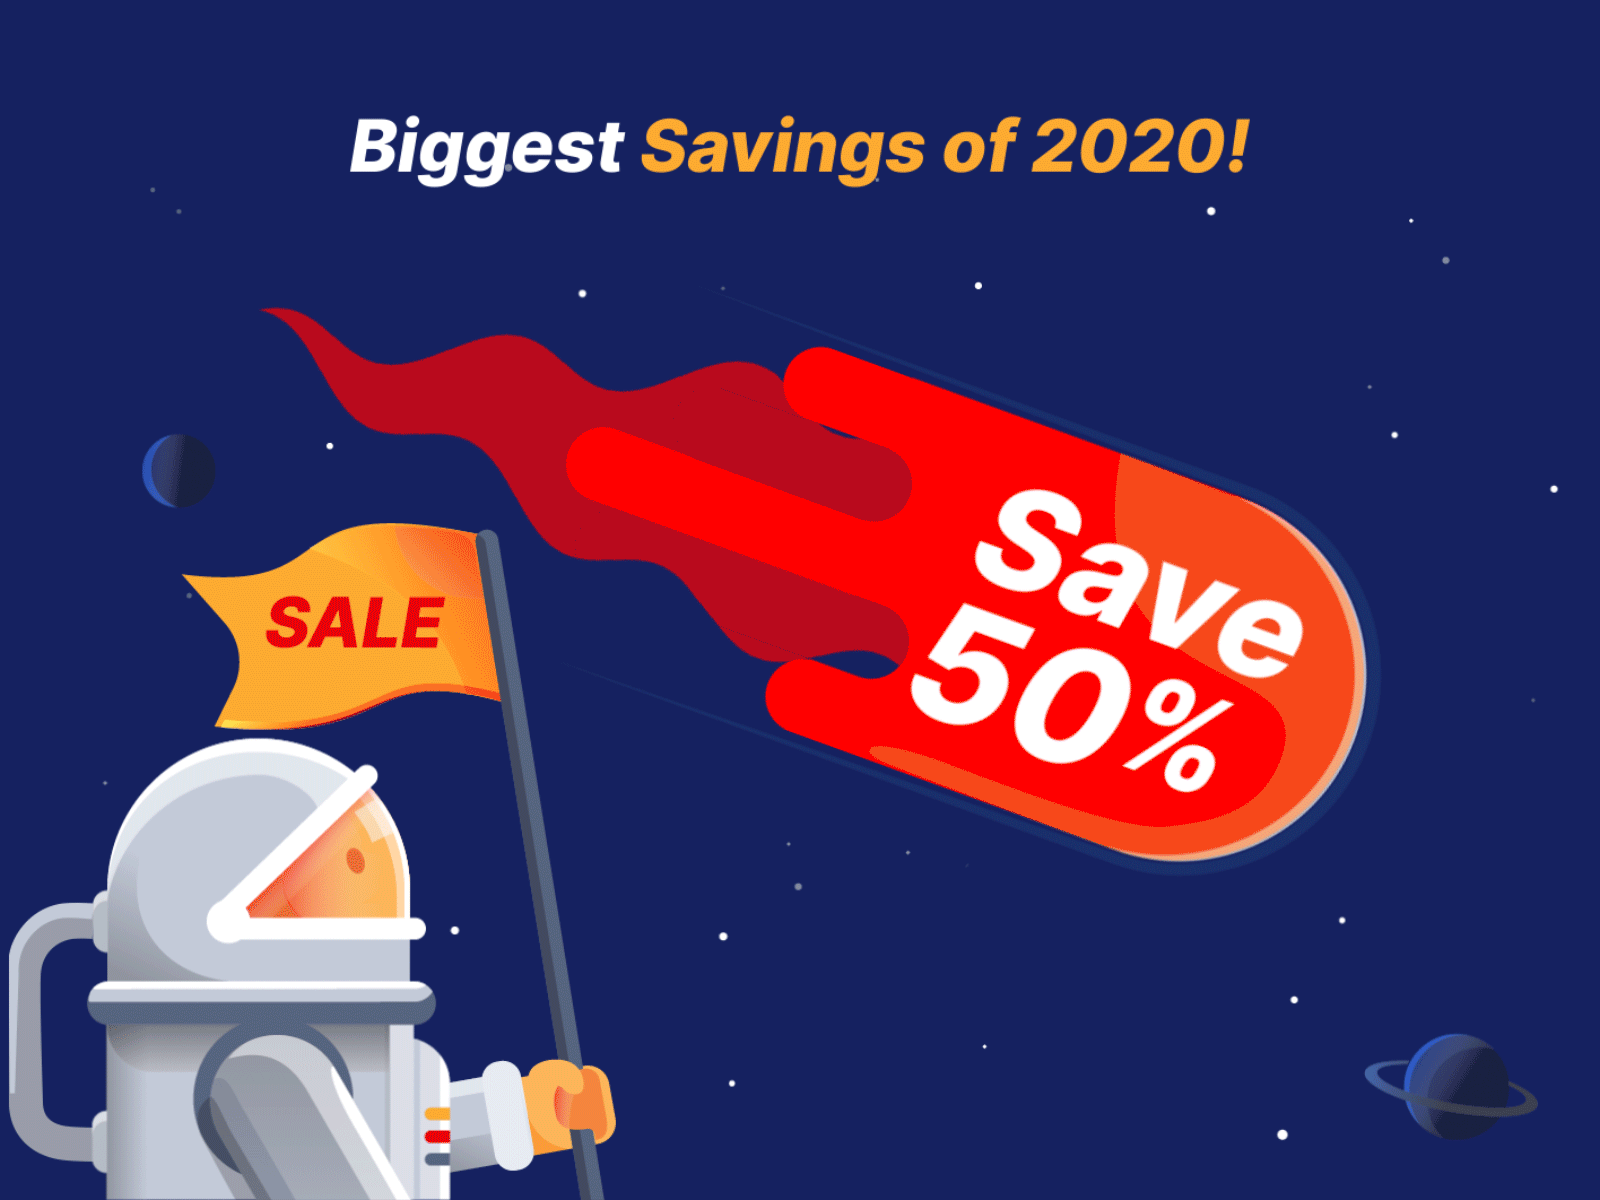 End Of Year 2020 Sale